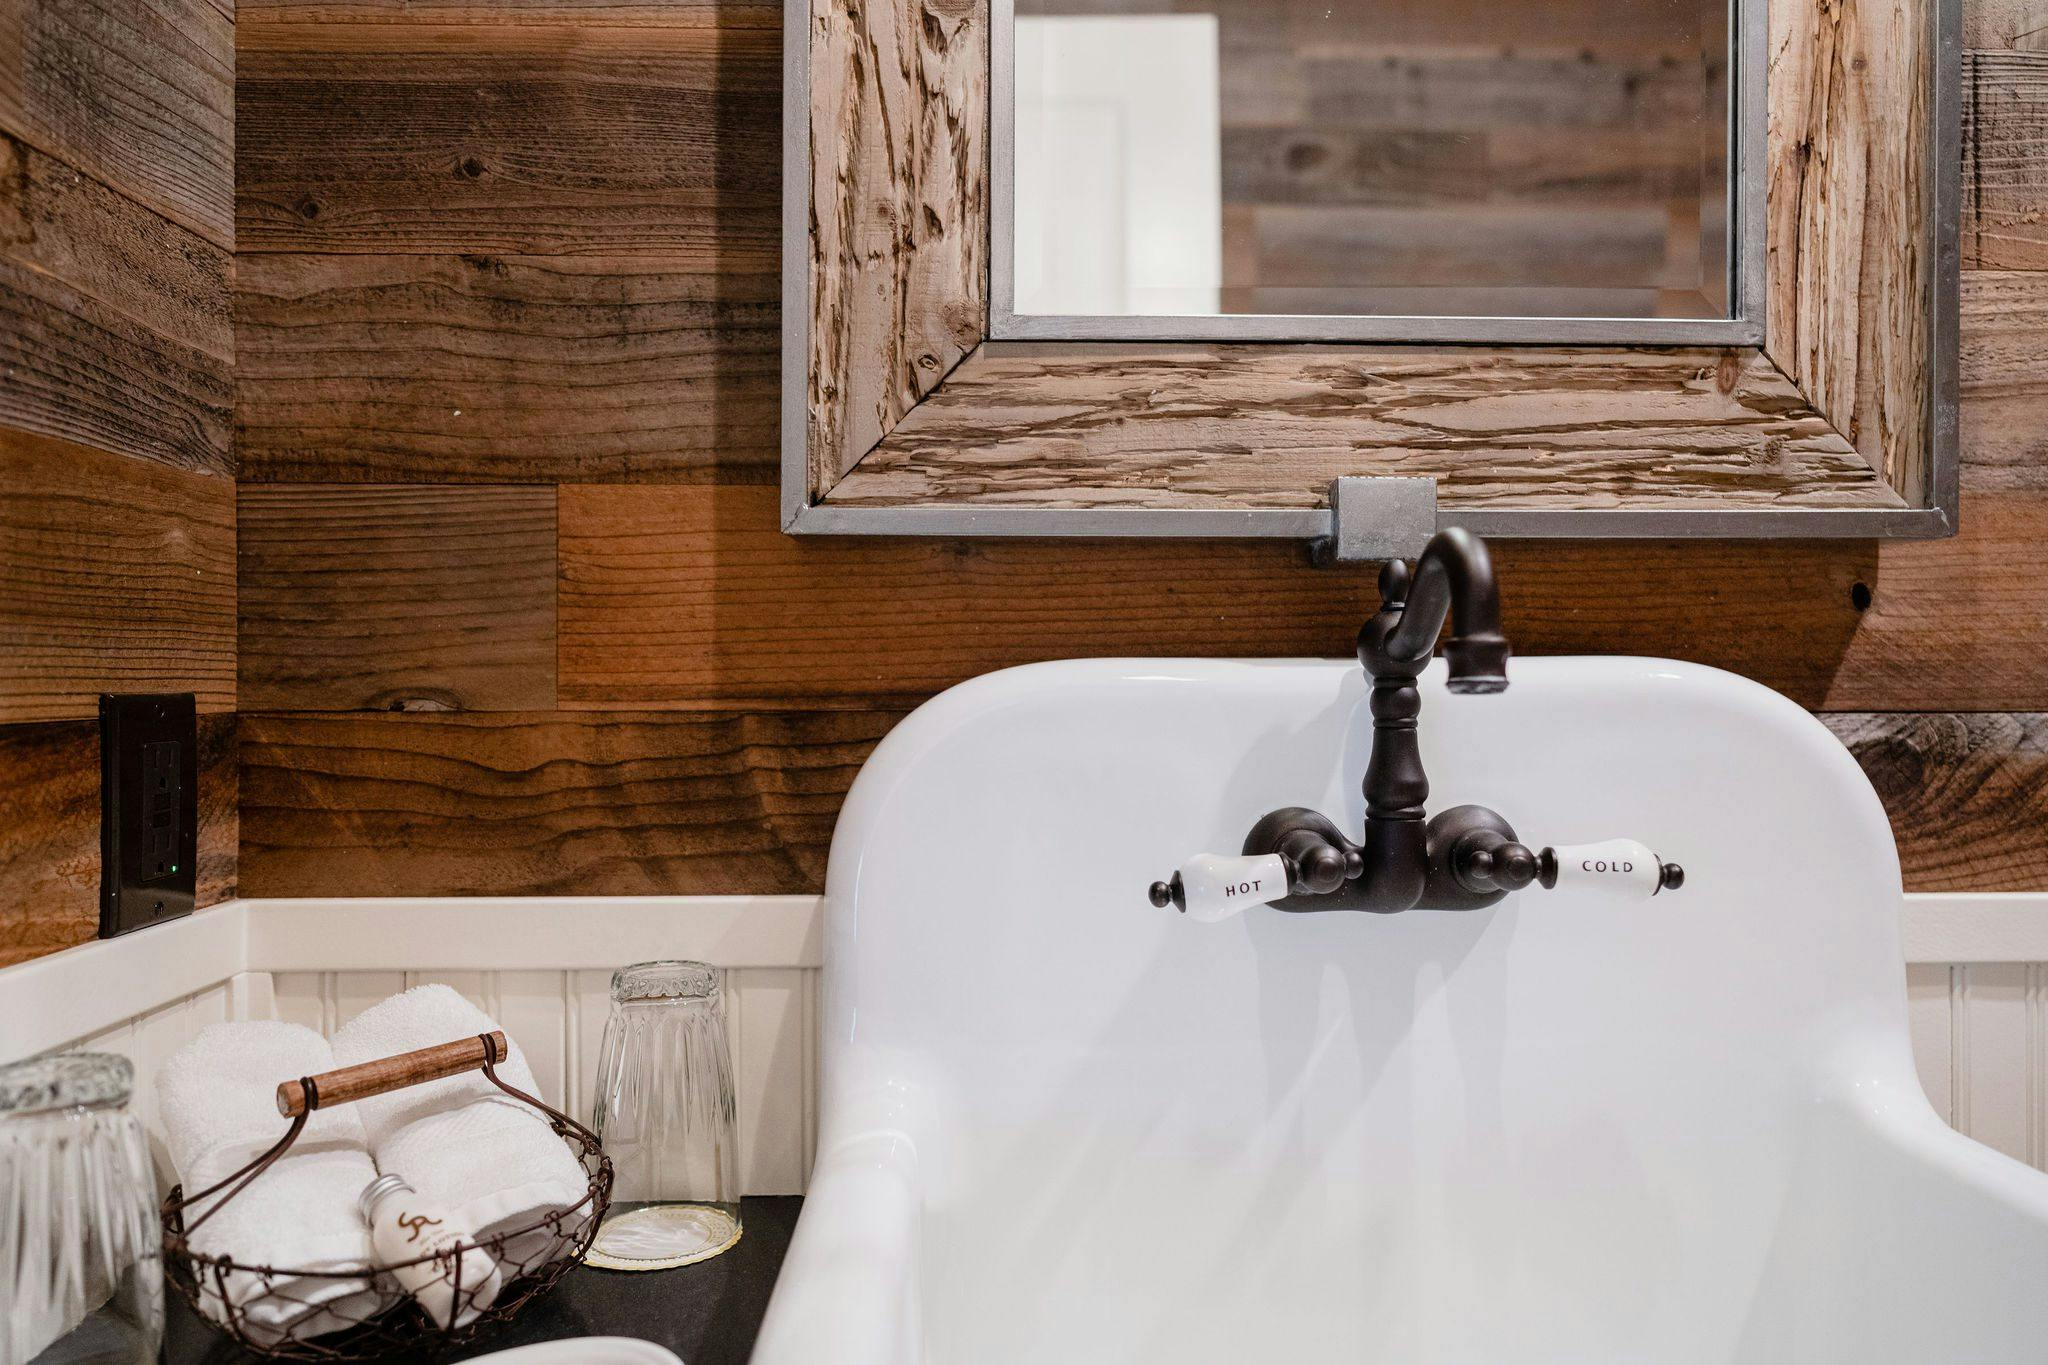 white sink and wooden walls